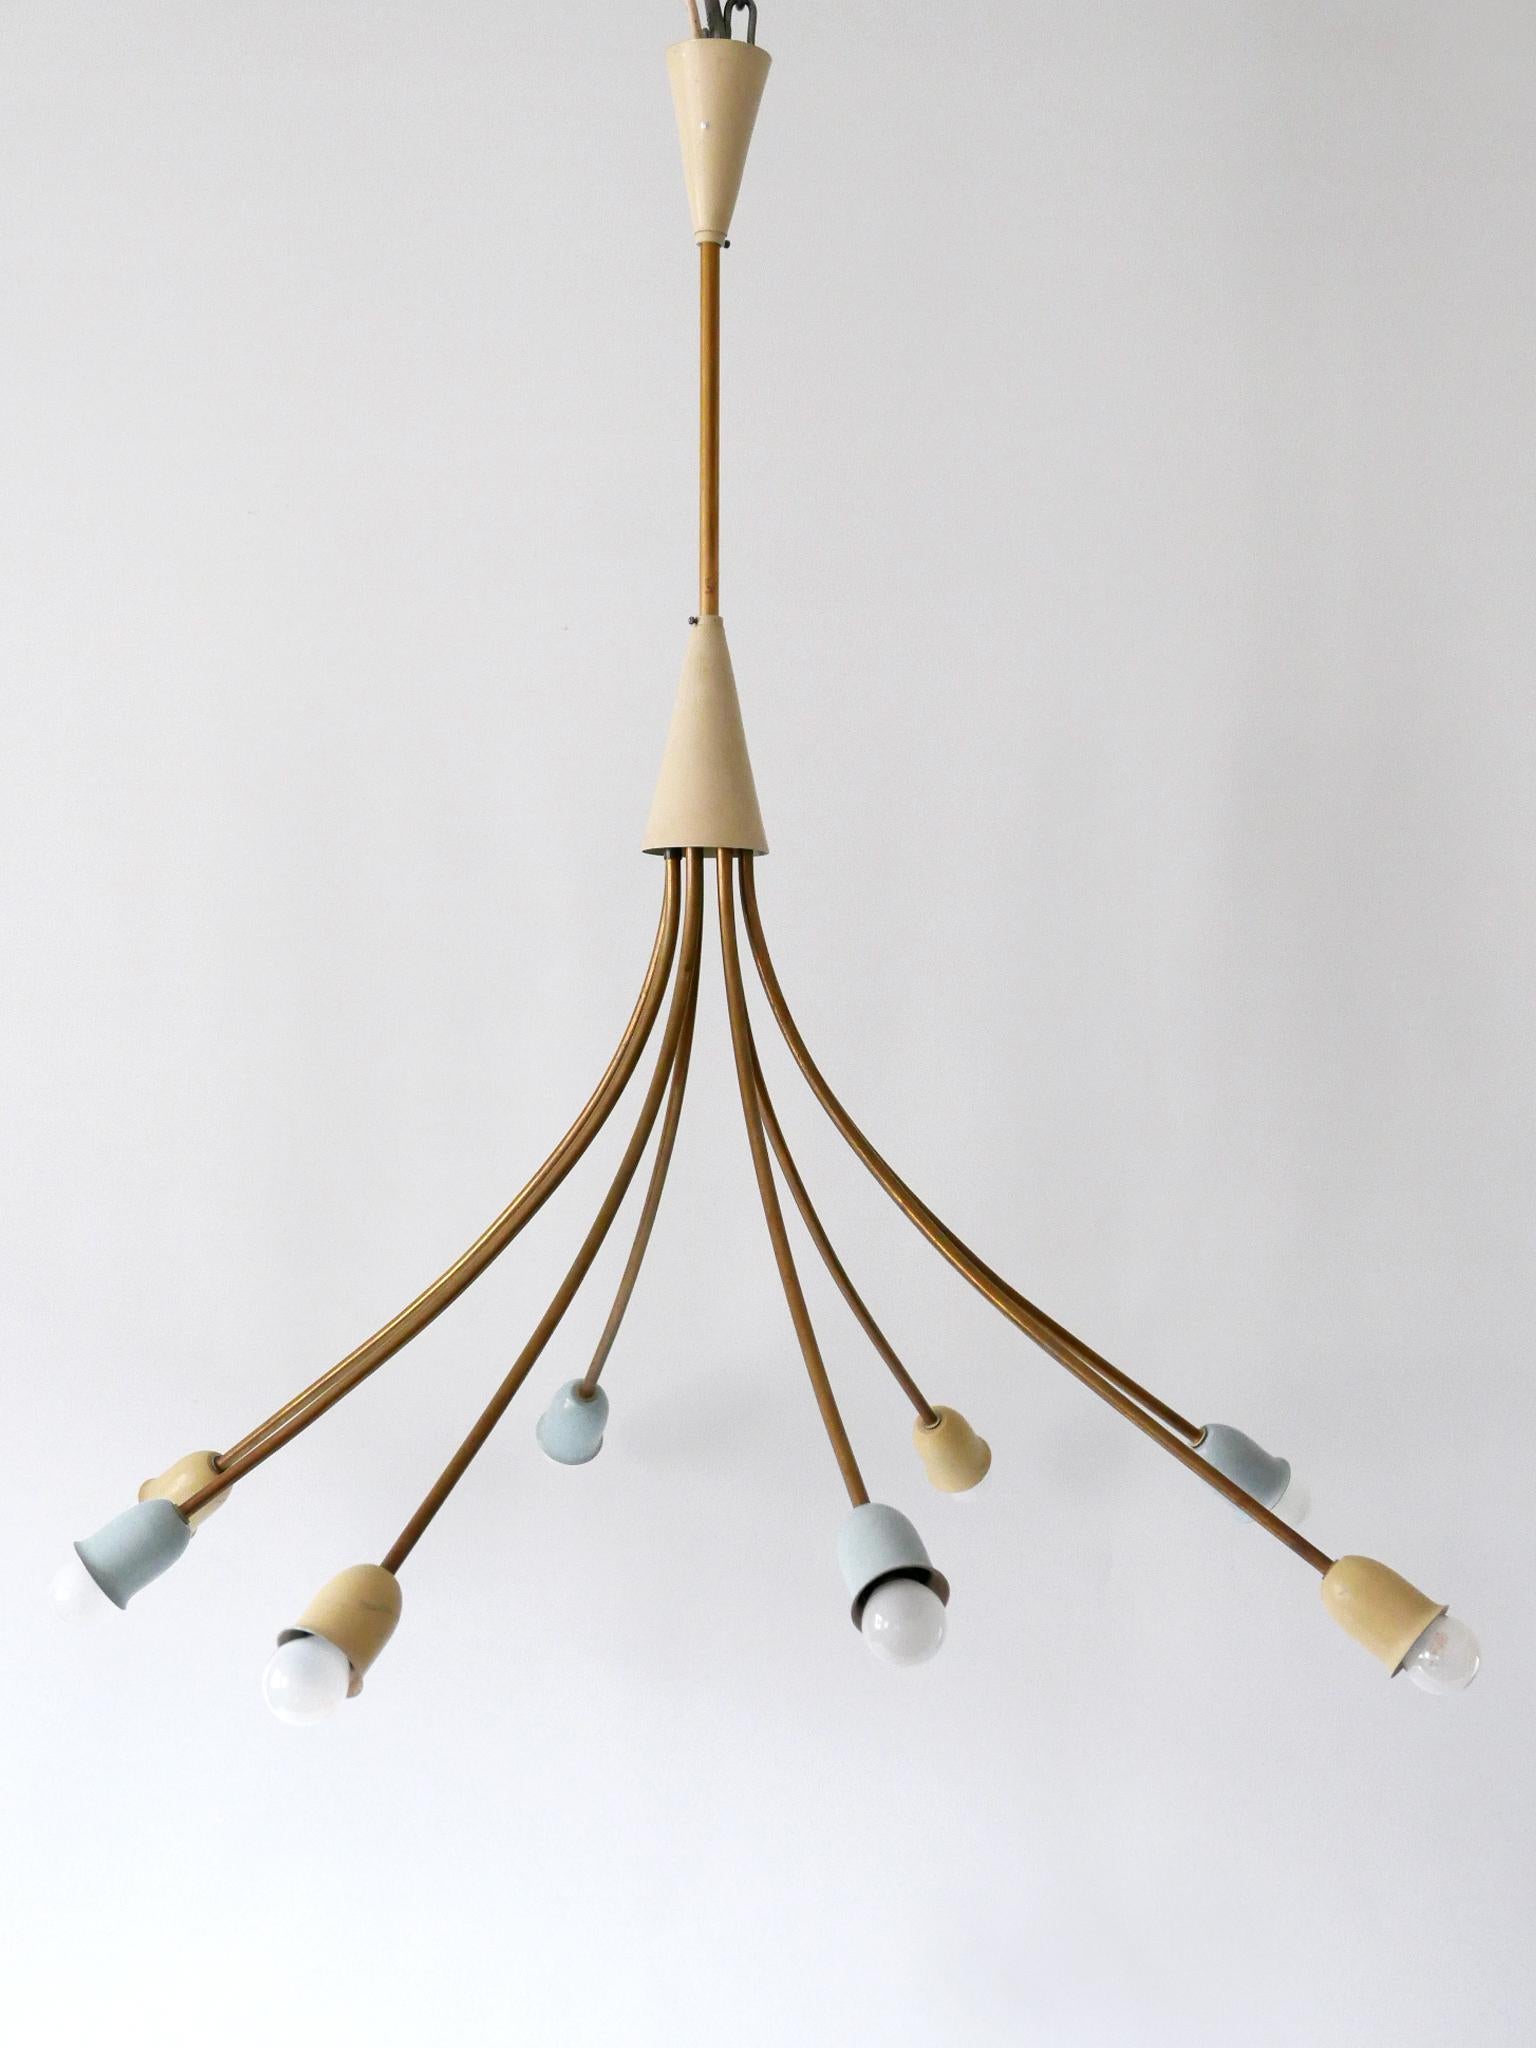 Extremely rare & highly decorative Mid-Century Modern eight-armed sputnik chandelier or pendant lamp in pastel colors. Designed and manufactured in Germany, 1950s.

Executed in brass and aluminium, the lamp needs 8 x E14 / E12 Edison screw fit